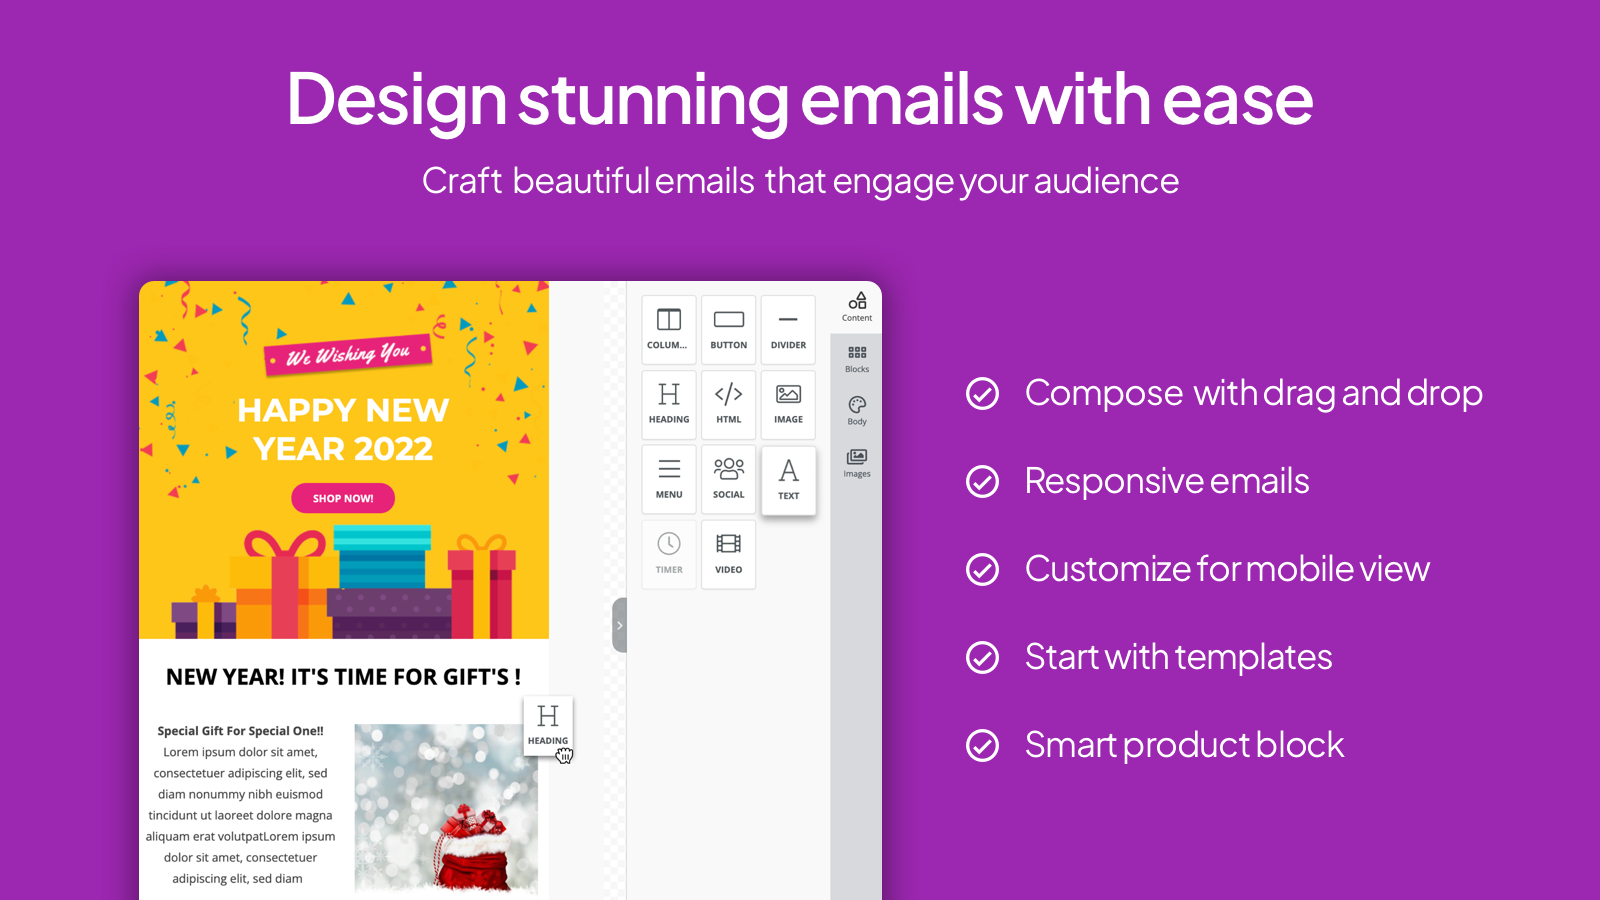 Design stunning emails with ease